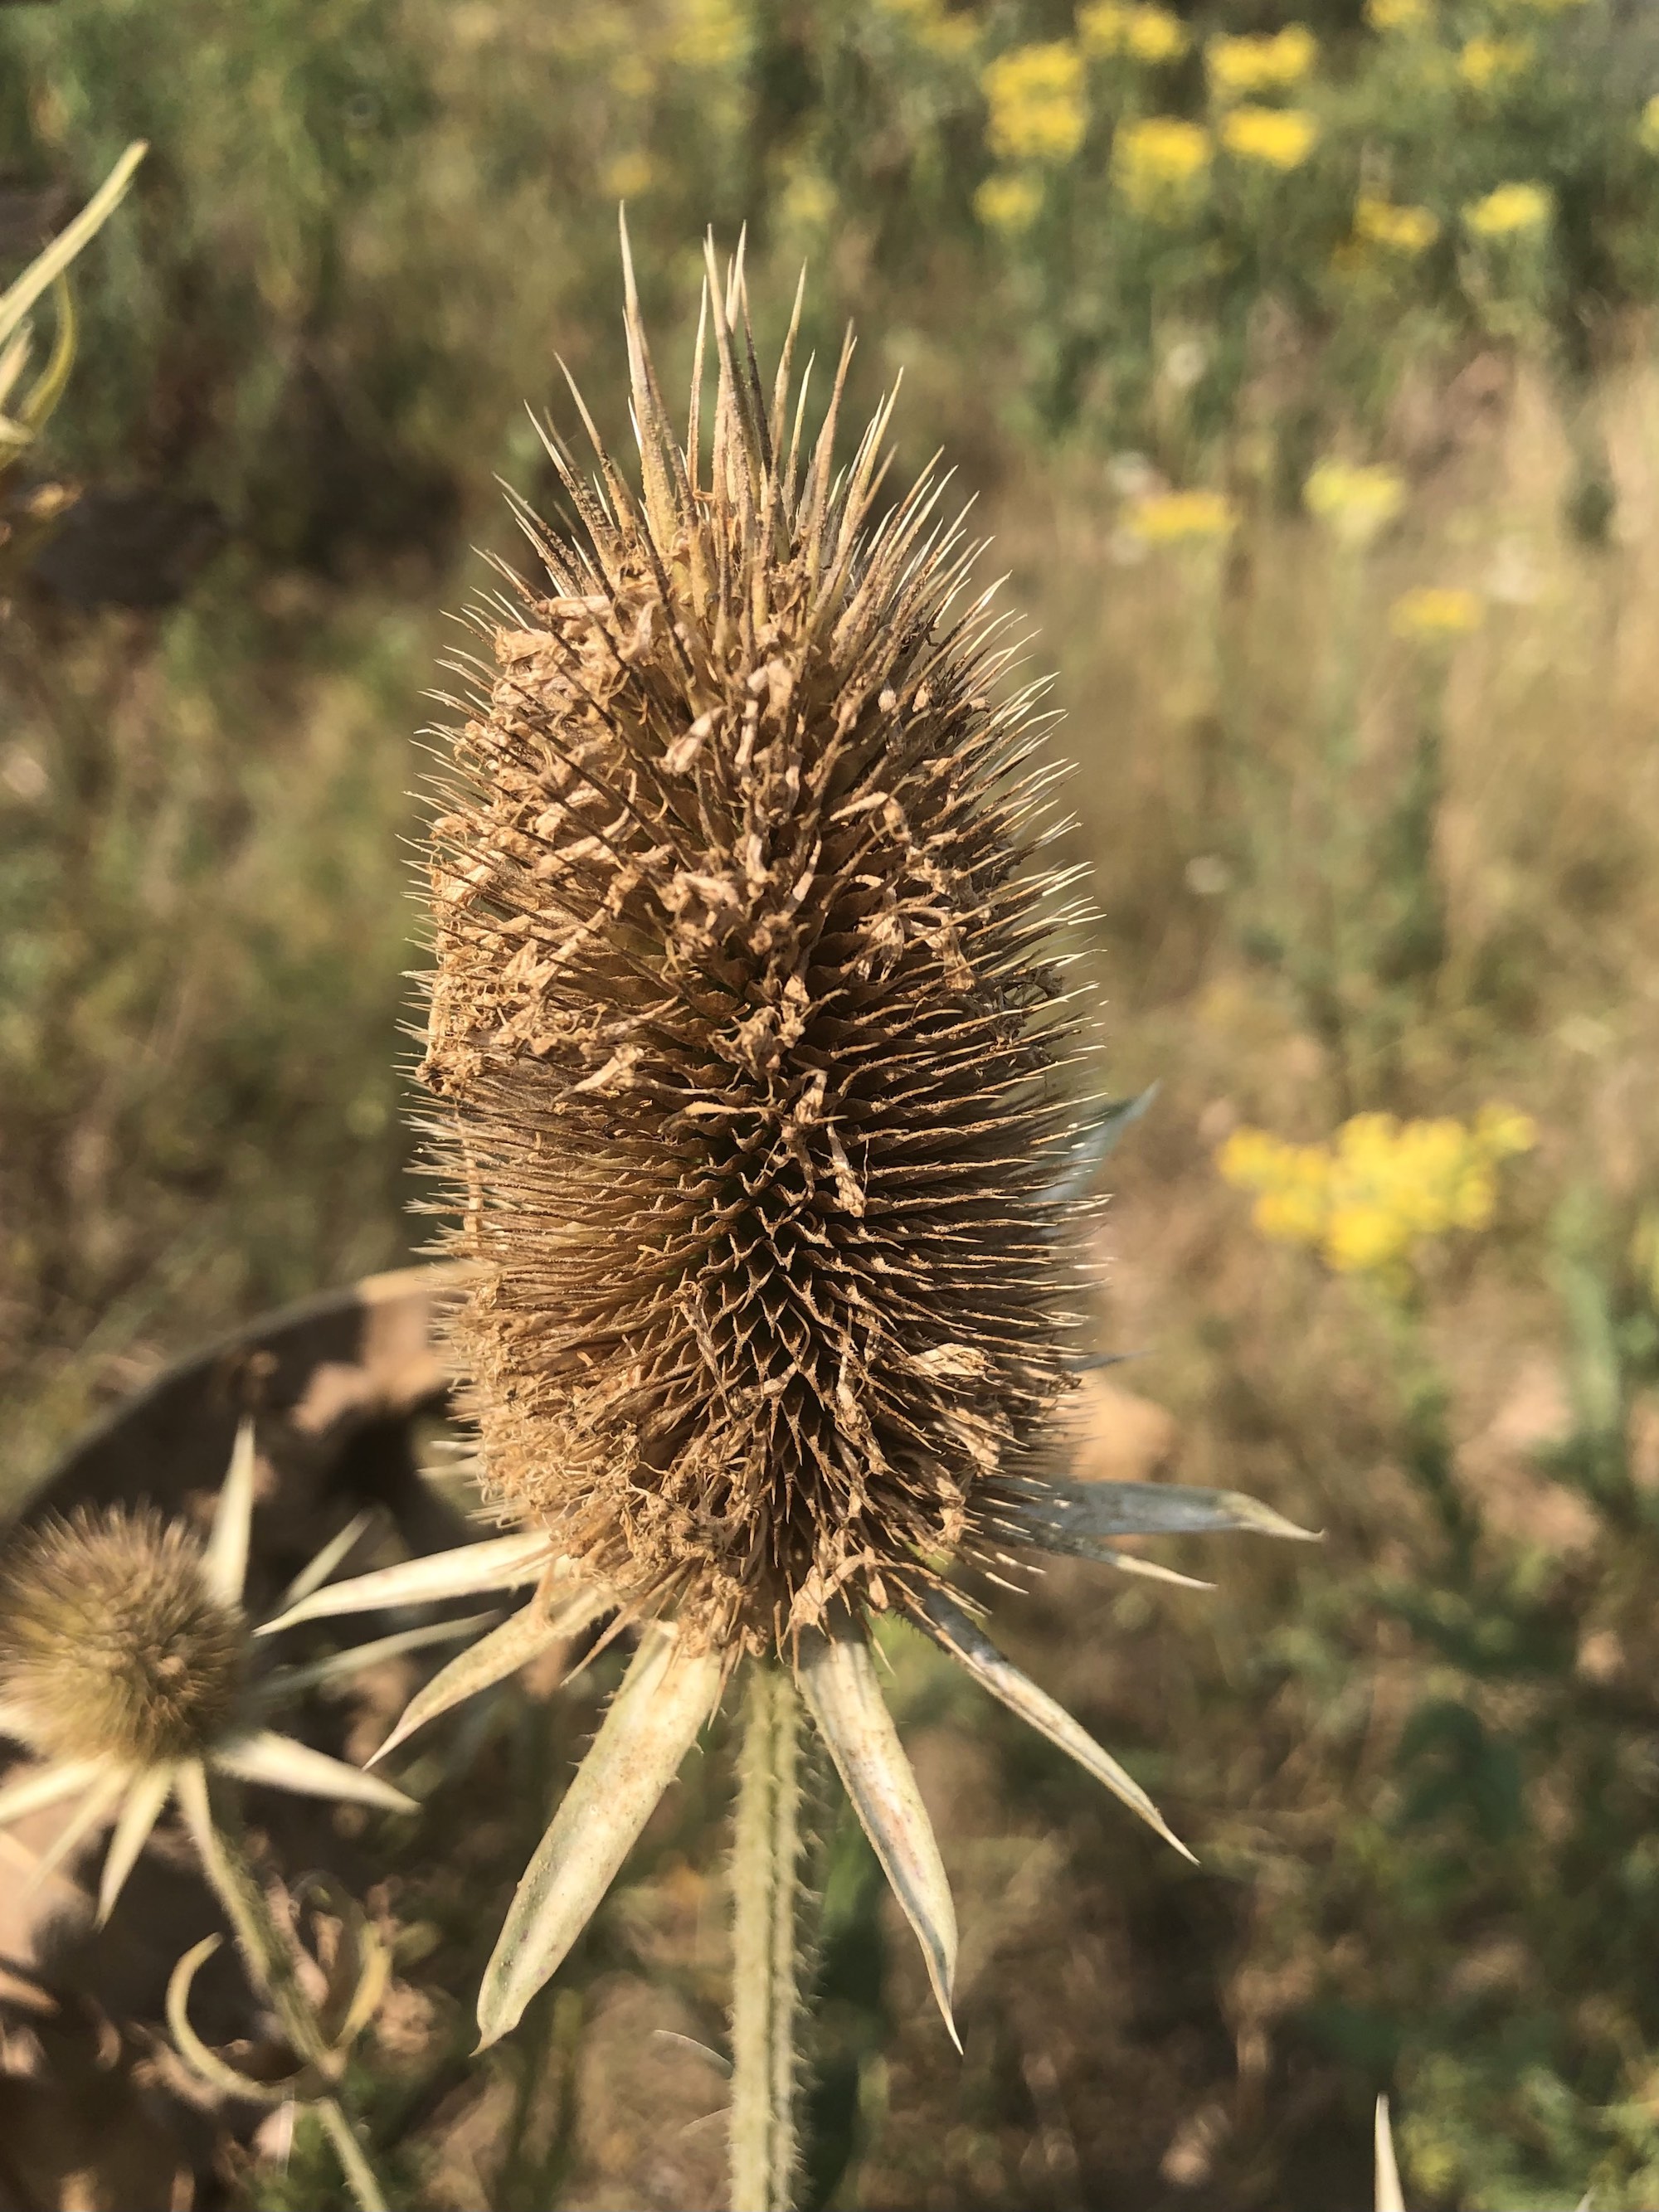 Cutleaf Teasel in wild area between GHC Hatchery Hill Clinic parking lot and Cahill Main Road in Madison, Wisconsin on August 5, 2021.